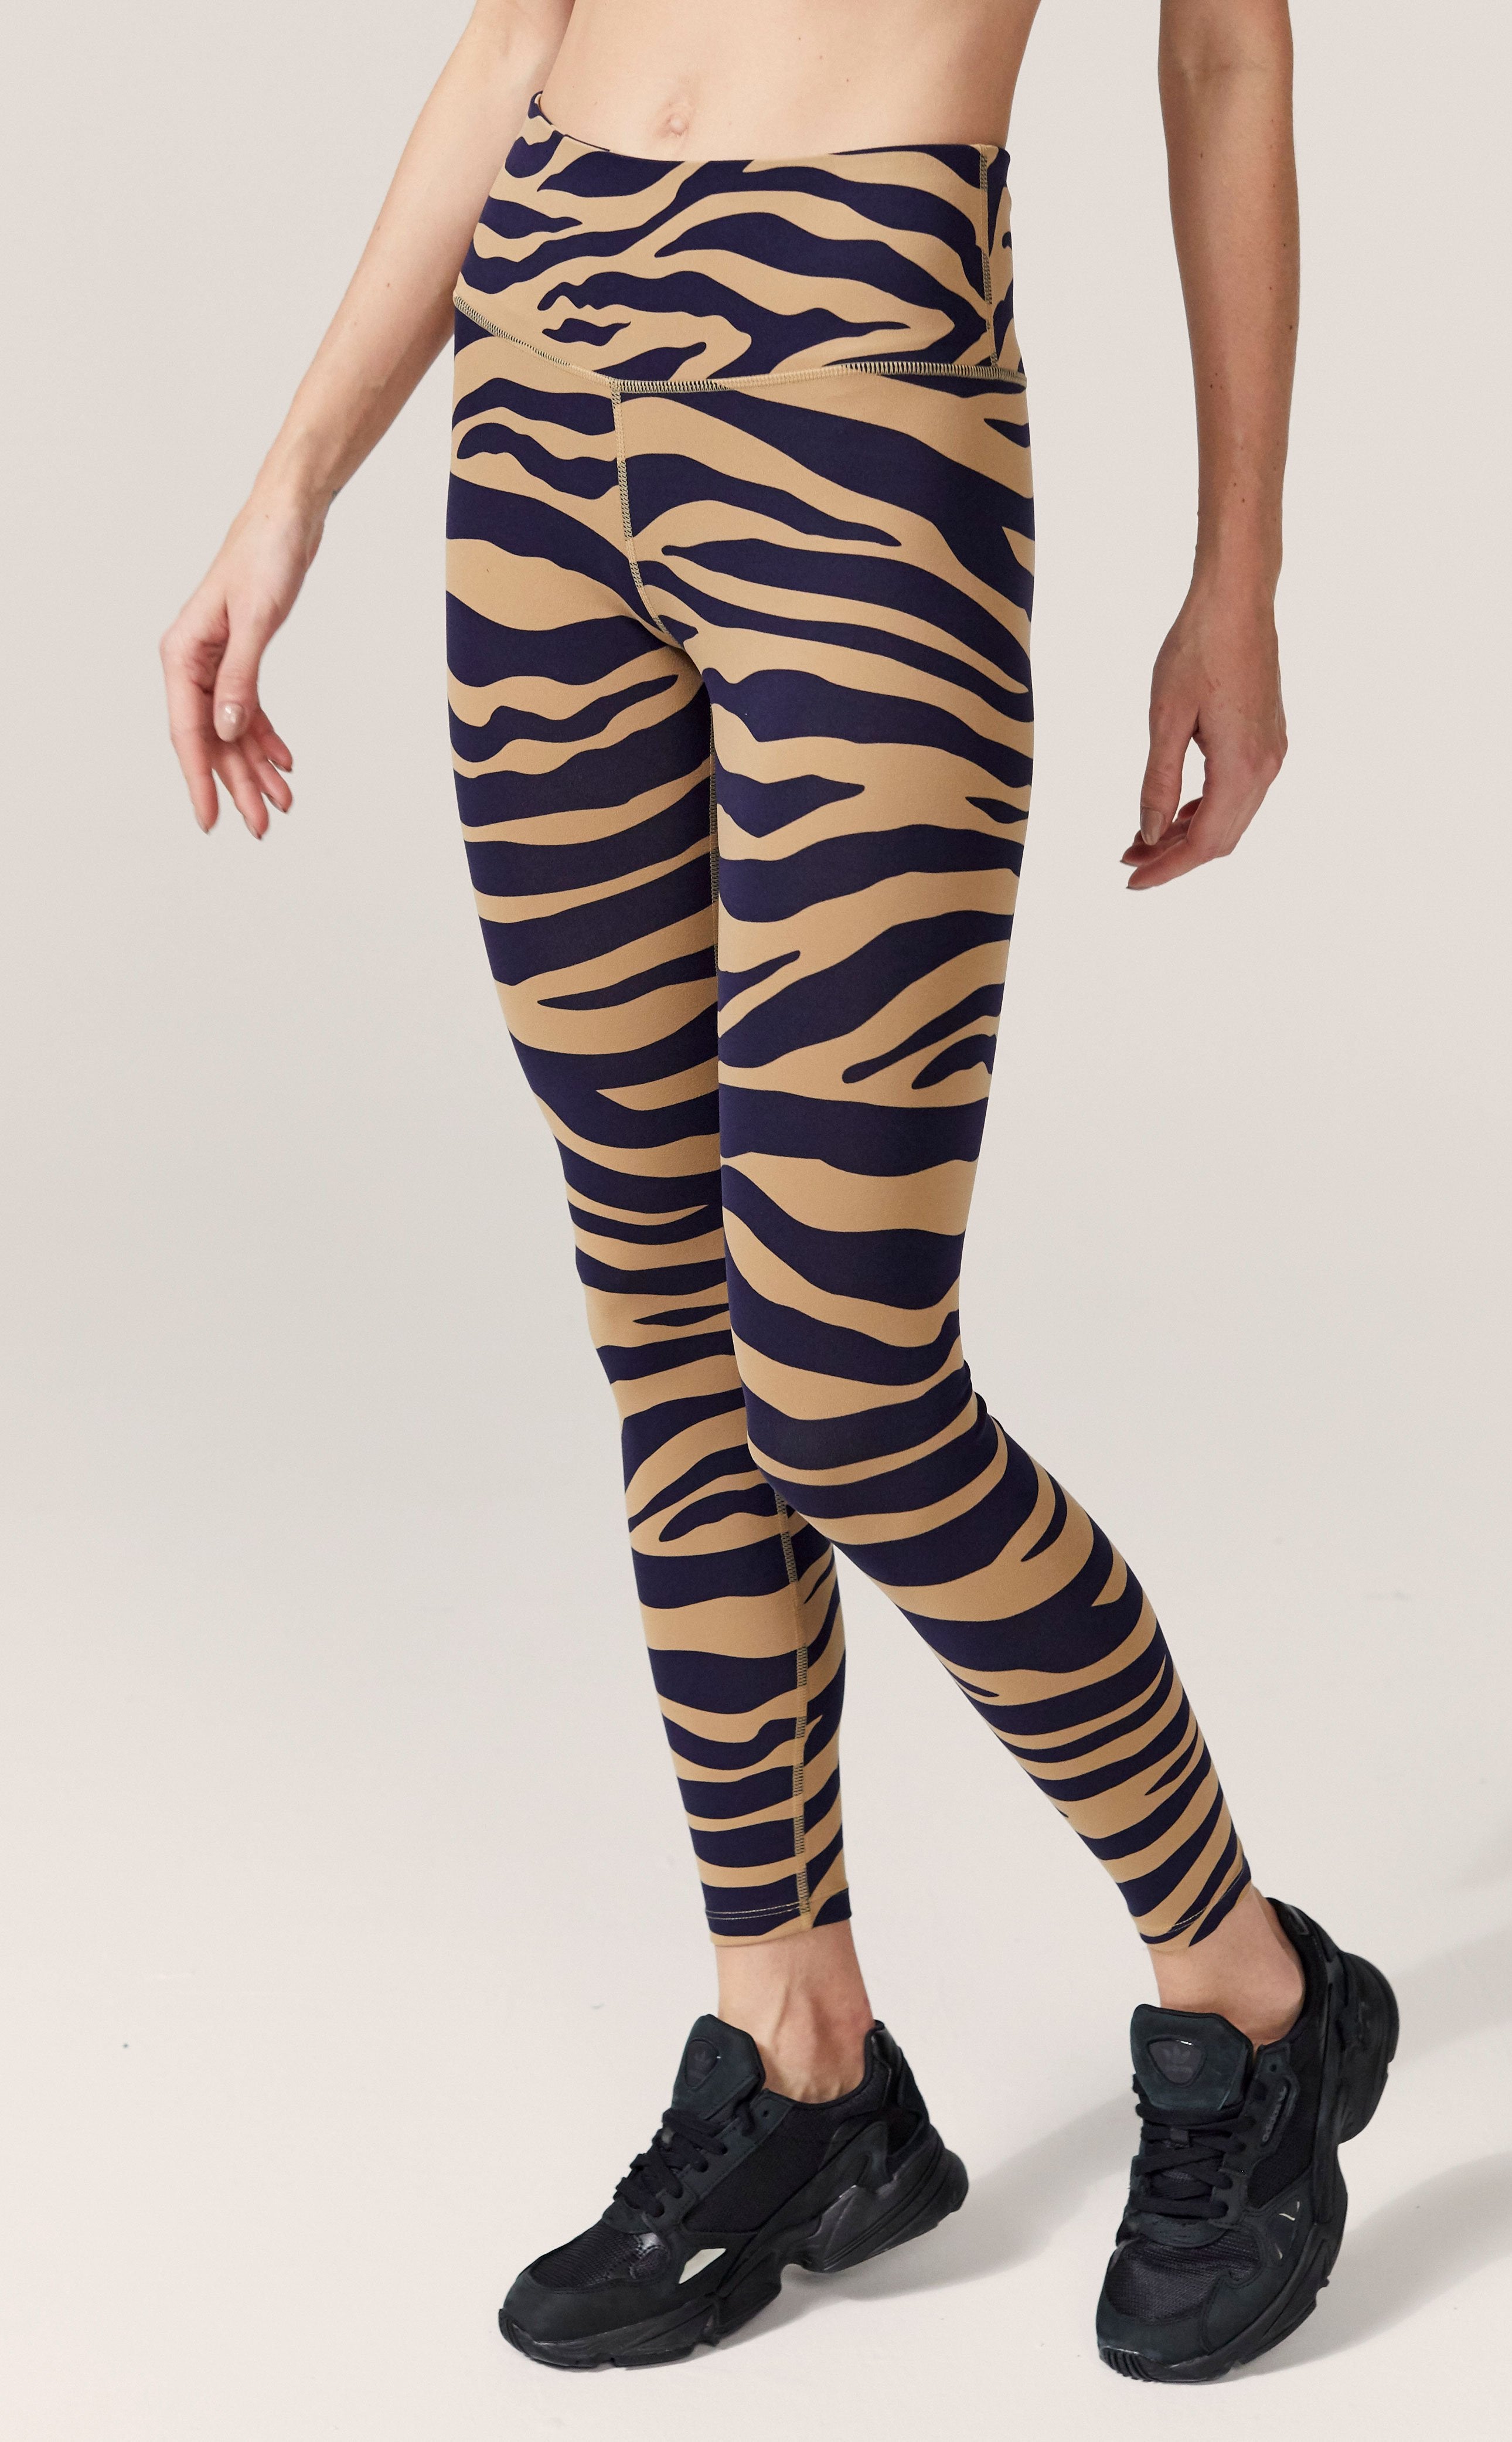 Varley - Featuring our Century Legging in Yellow Cheetah, look at that  print! #inVarley